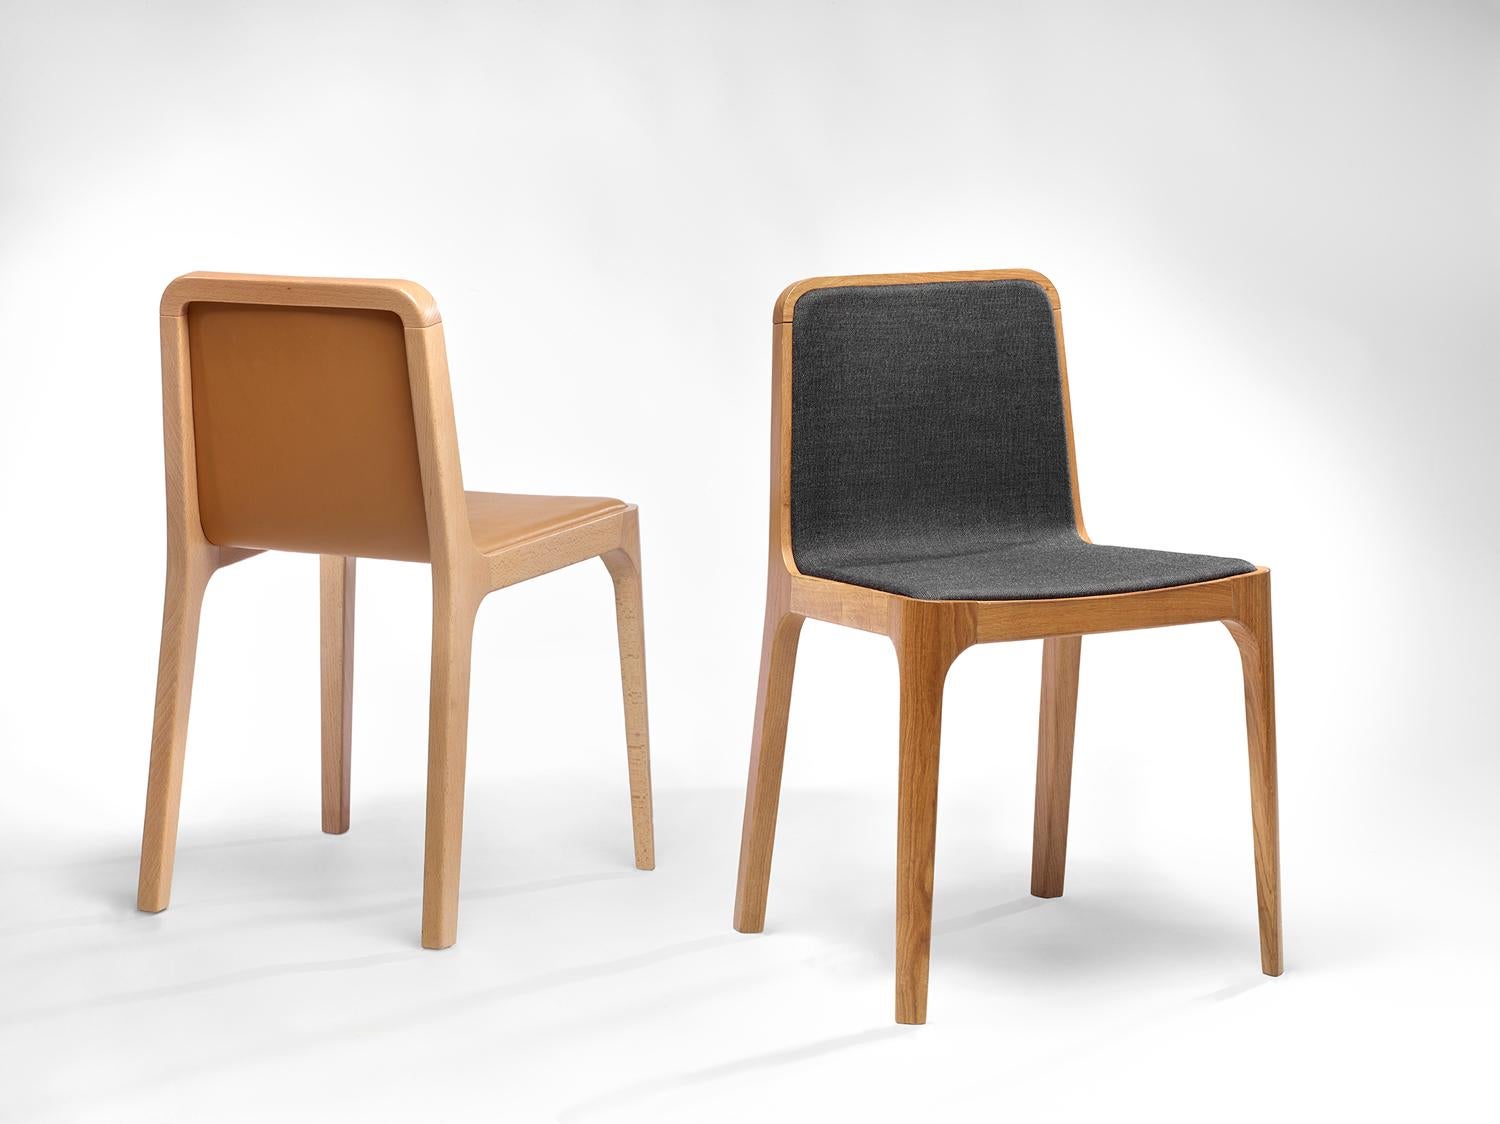 Minimalist Modern Chair - Ash Wood/Walnut Stained Finnishing Fabric Upholstery In New Condition For Sale In Lisbon, PT